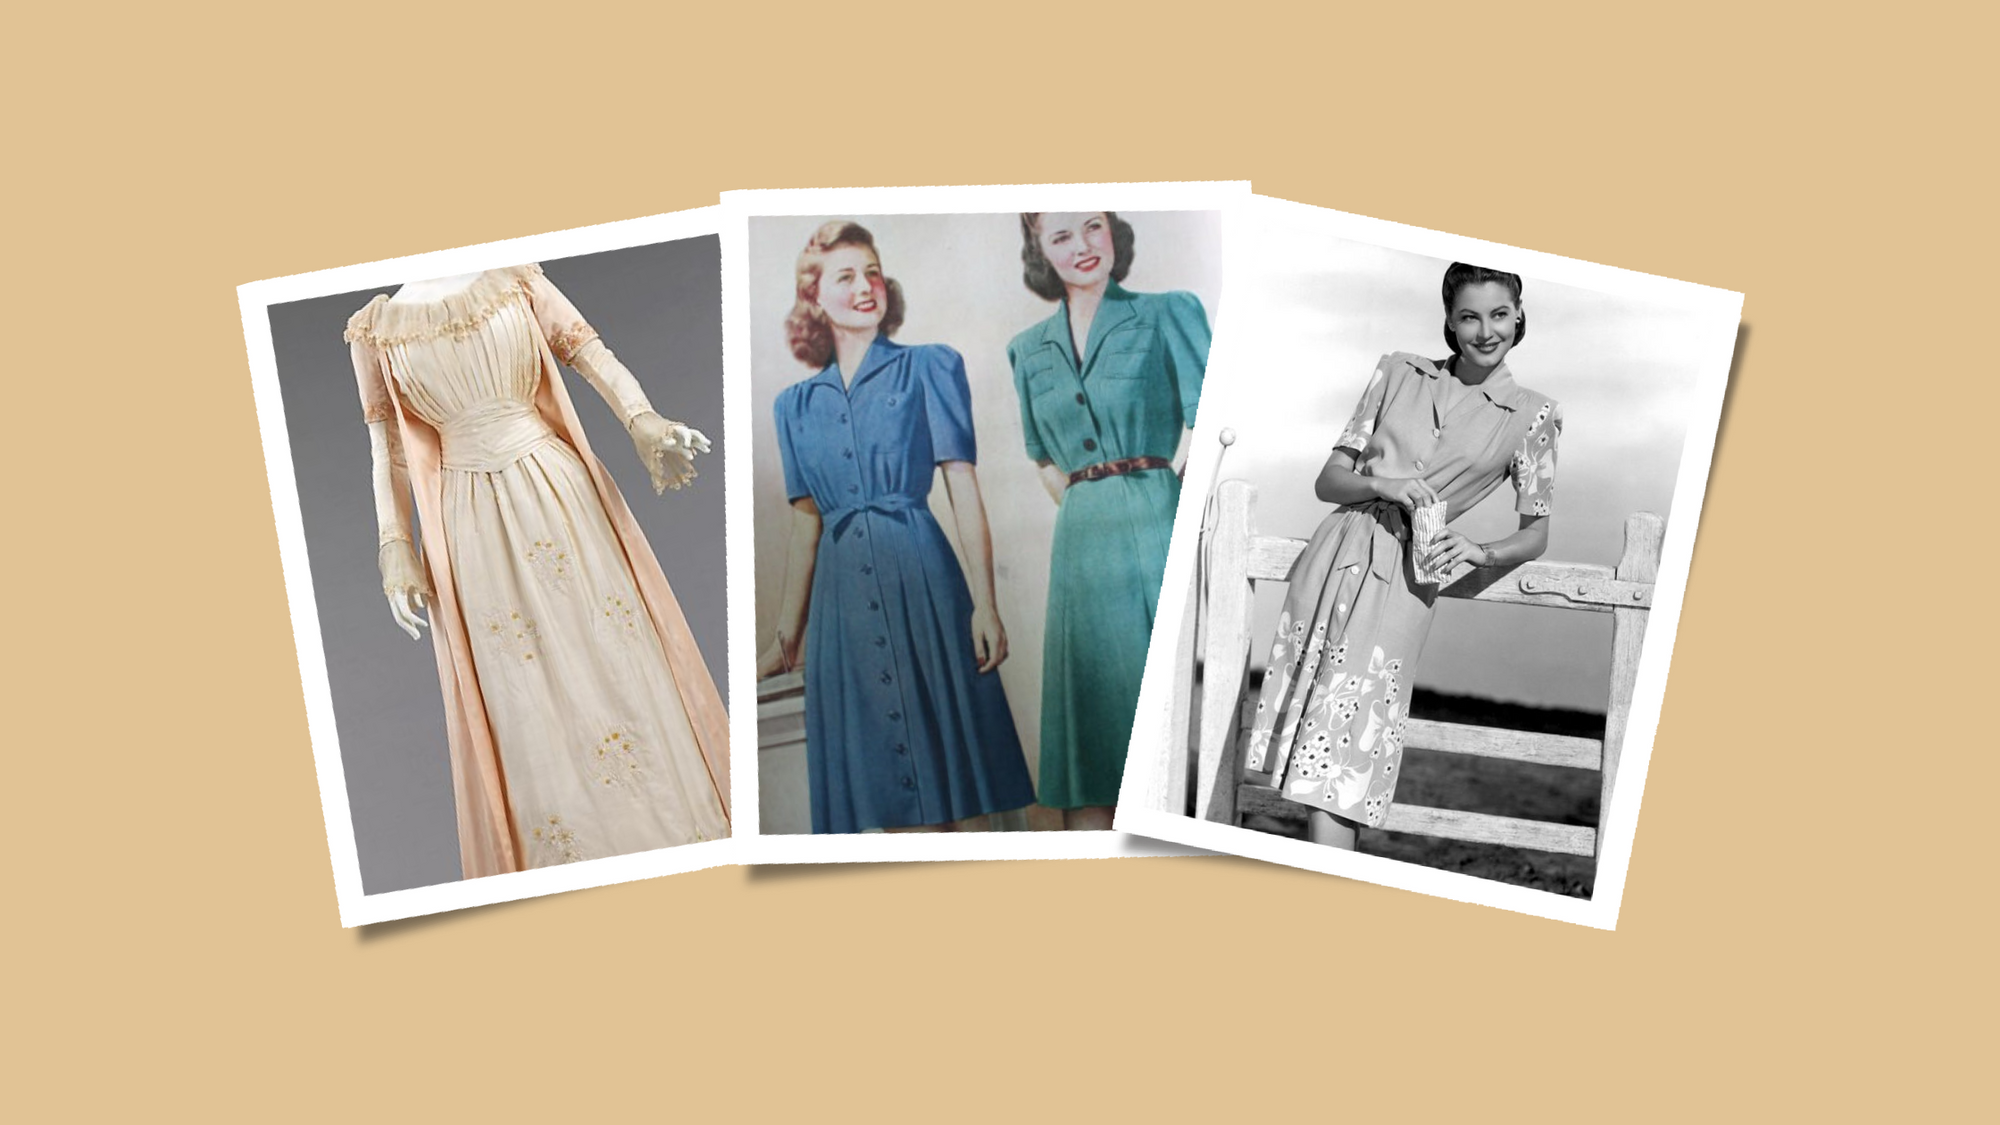 A Brief History of the Tea Dress